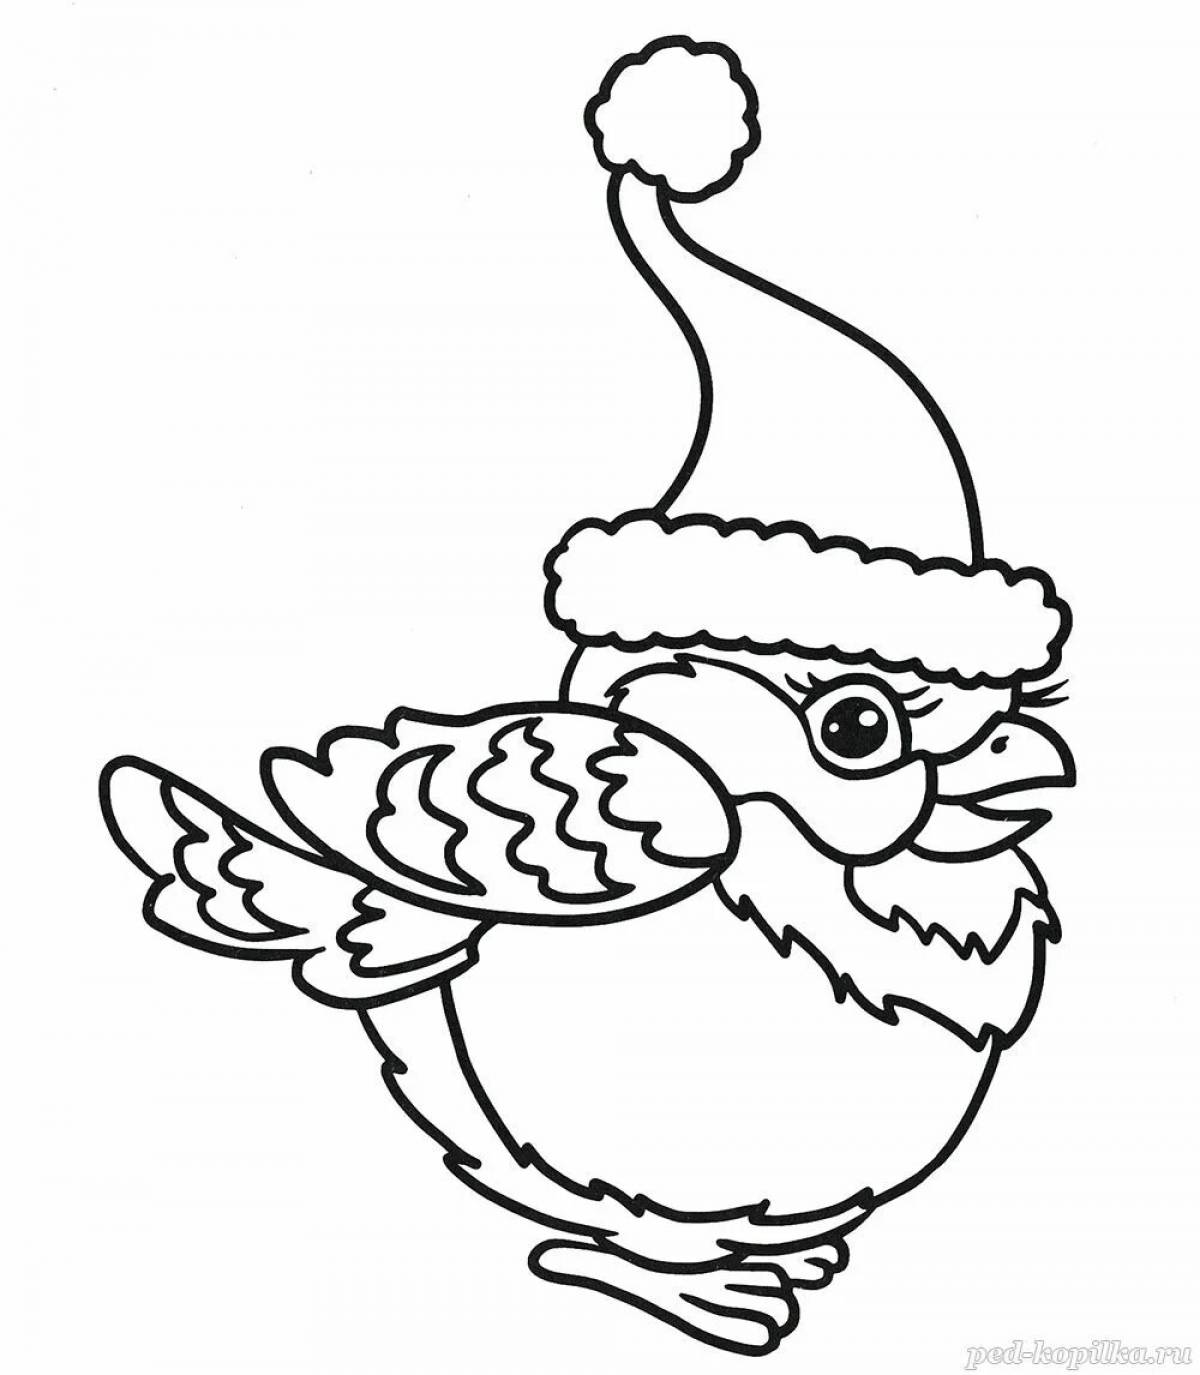 Majestic Christmas bird coloring page